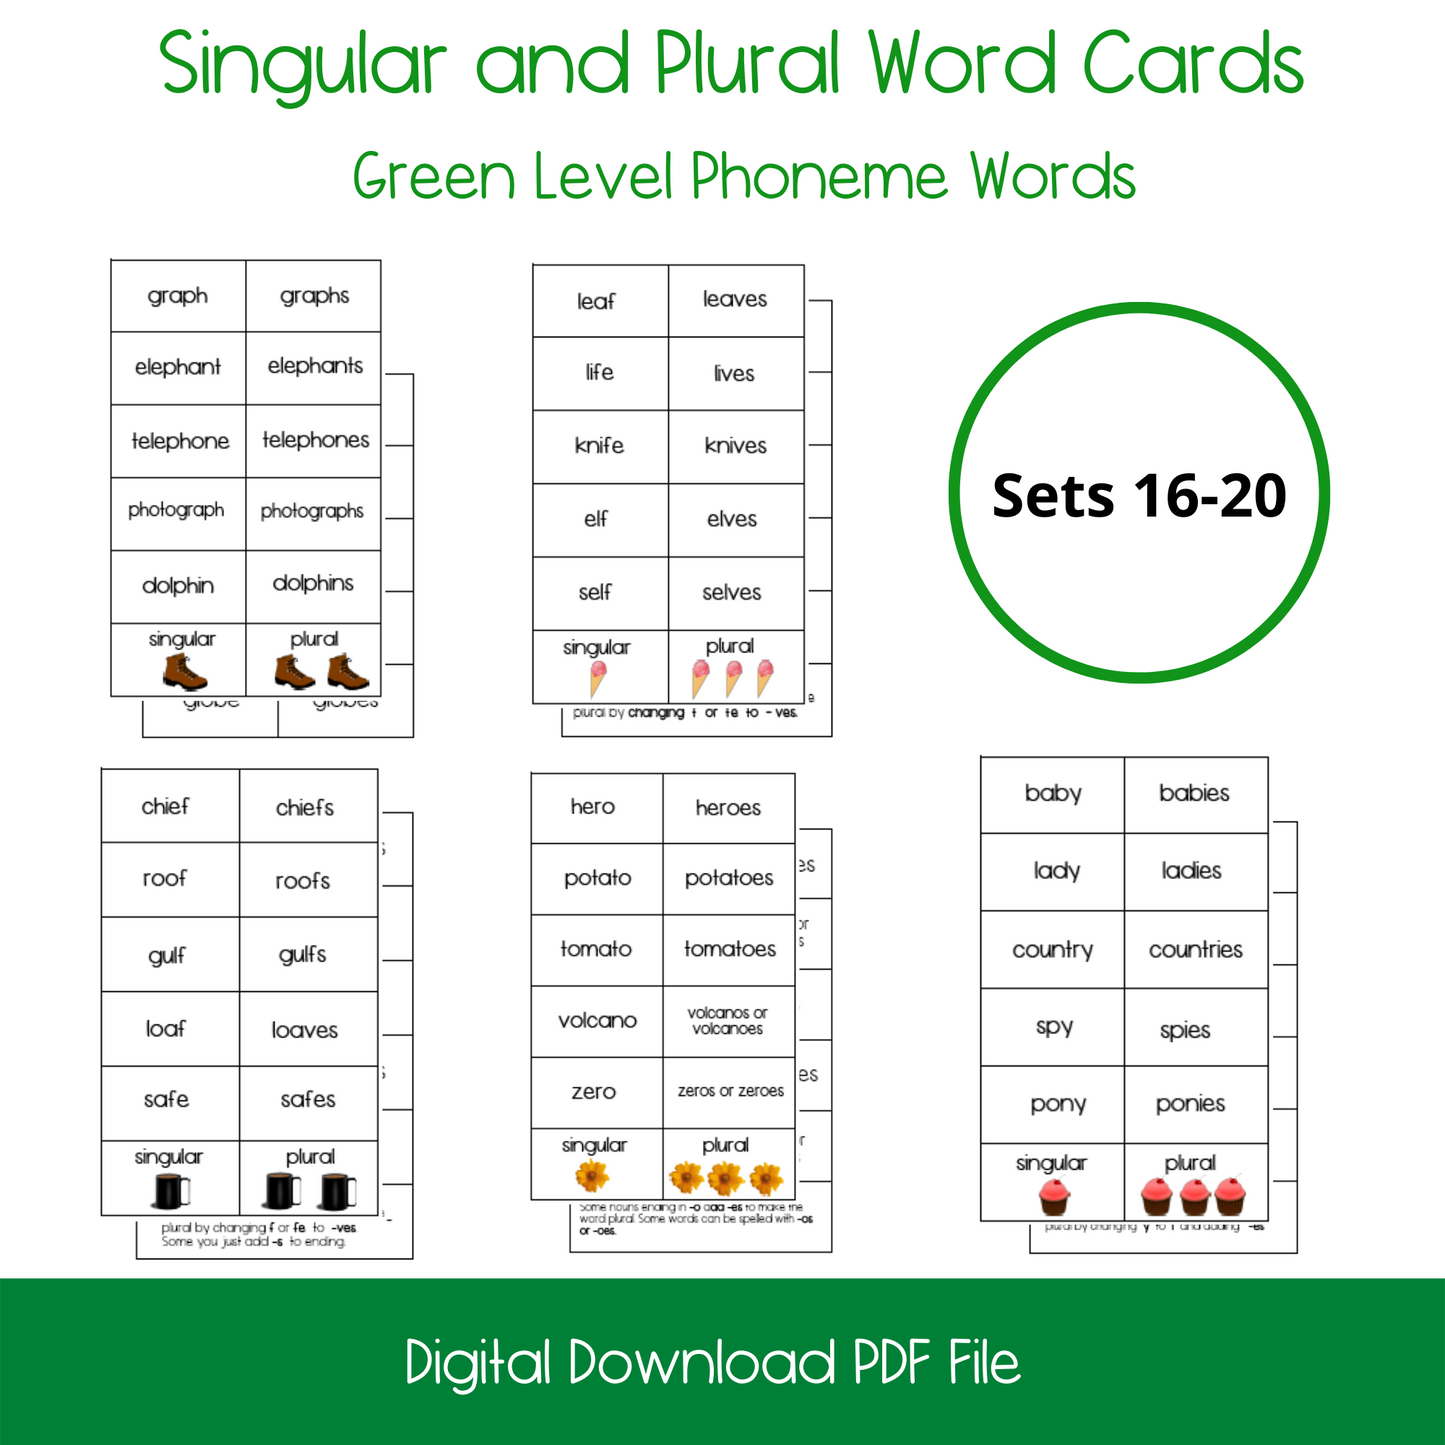 Printable Montessori Green Level Singular and Plural Cards, printable elementary singular and plural activity cards, printable ELL and ESL singular and plural cards for english language learners, homeschool